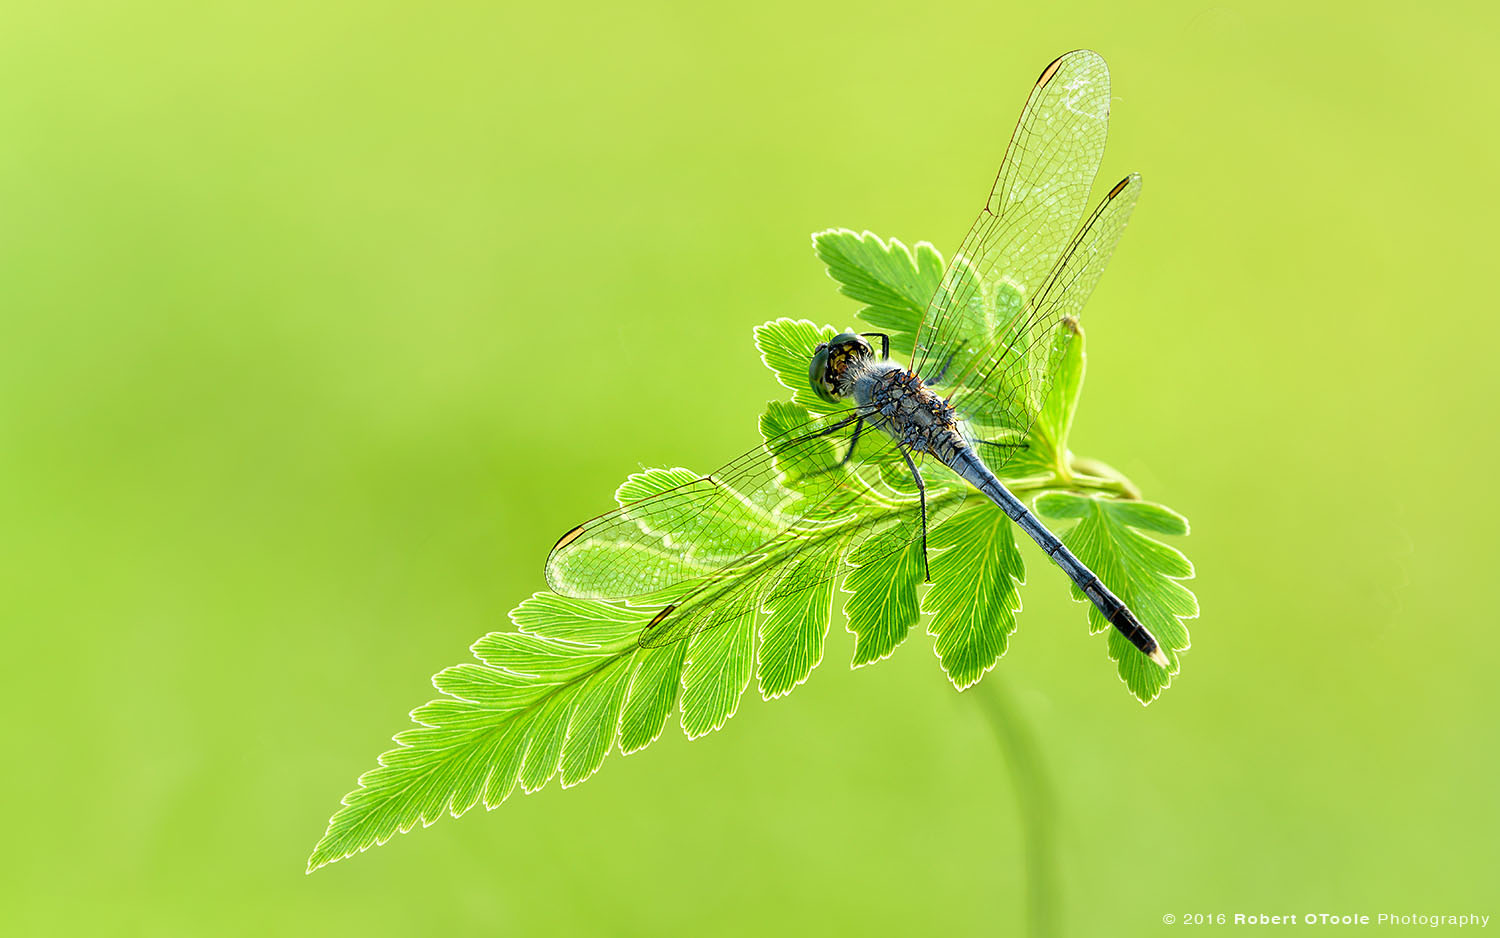 Common Parasol Dragonfly on Fern